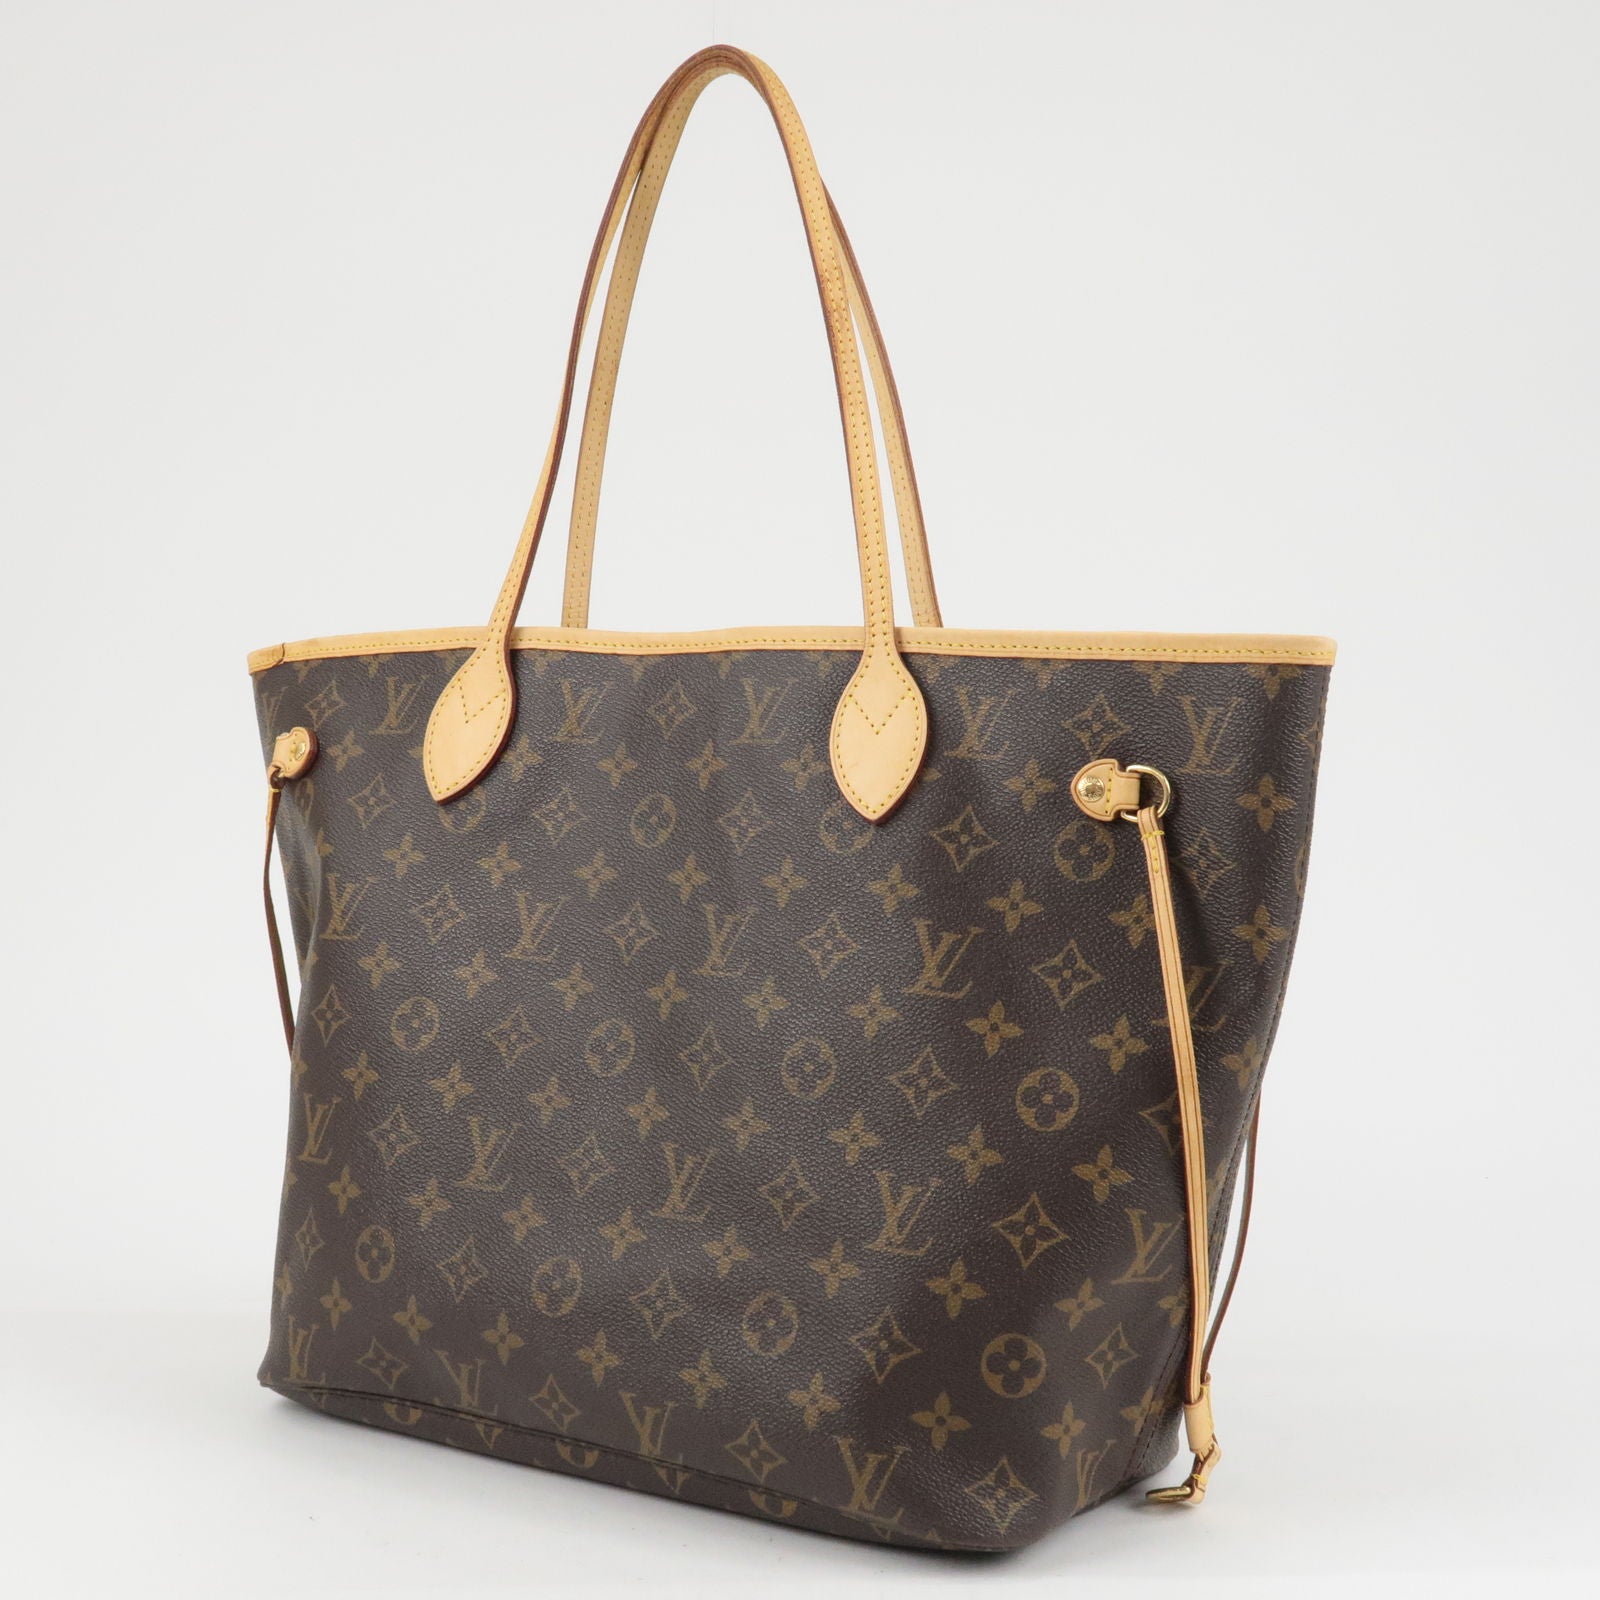 Hand - Neverfull - Tote - Monogram - ep_vintage luxury Store - MM - Louis -  Bag - louis vuitton petit noe shopping bag in pink epi leather - Bag -  M40156 – dct - Vuitton